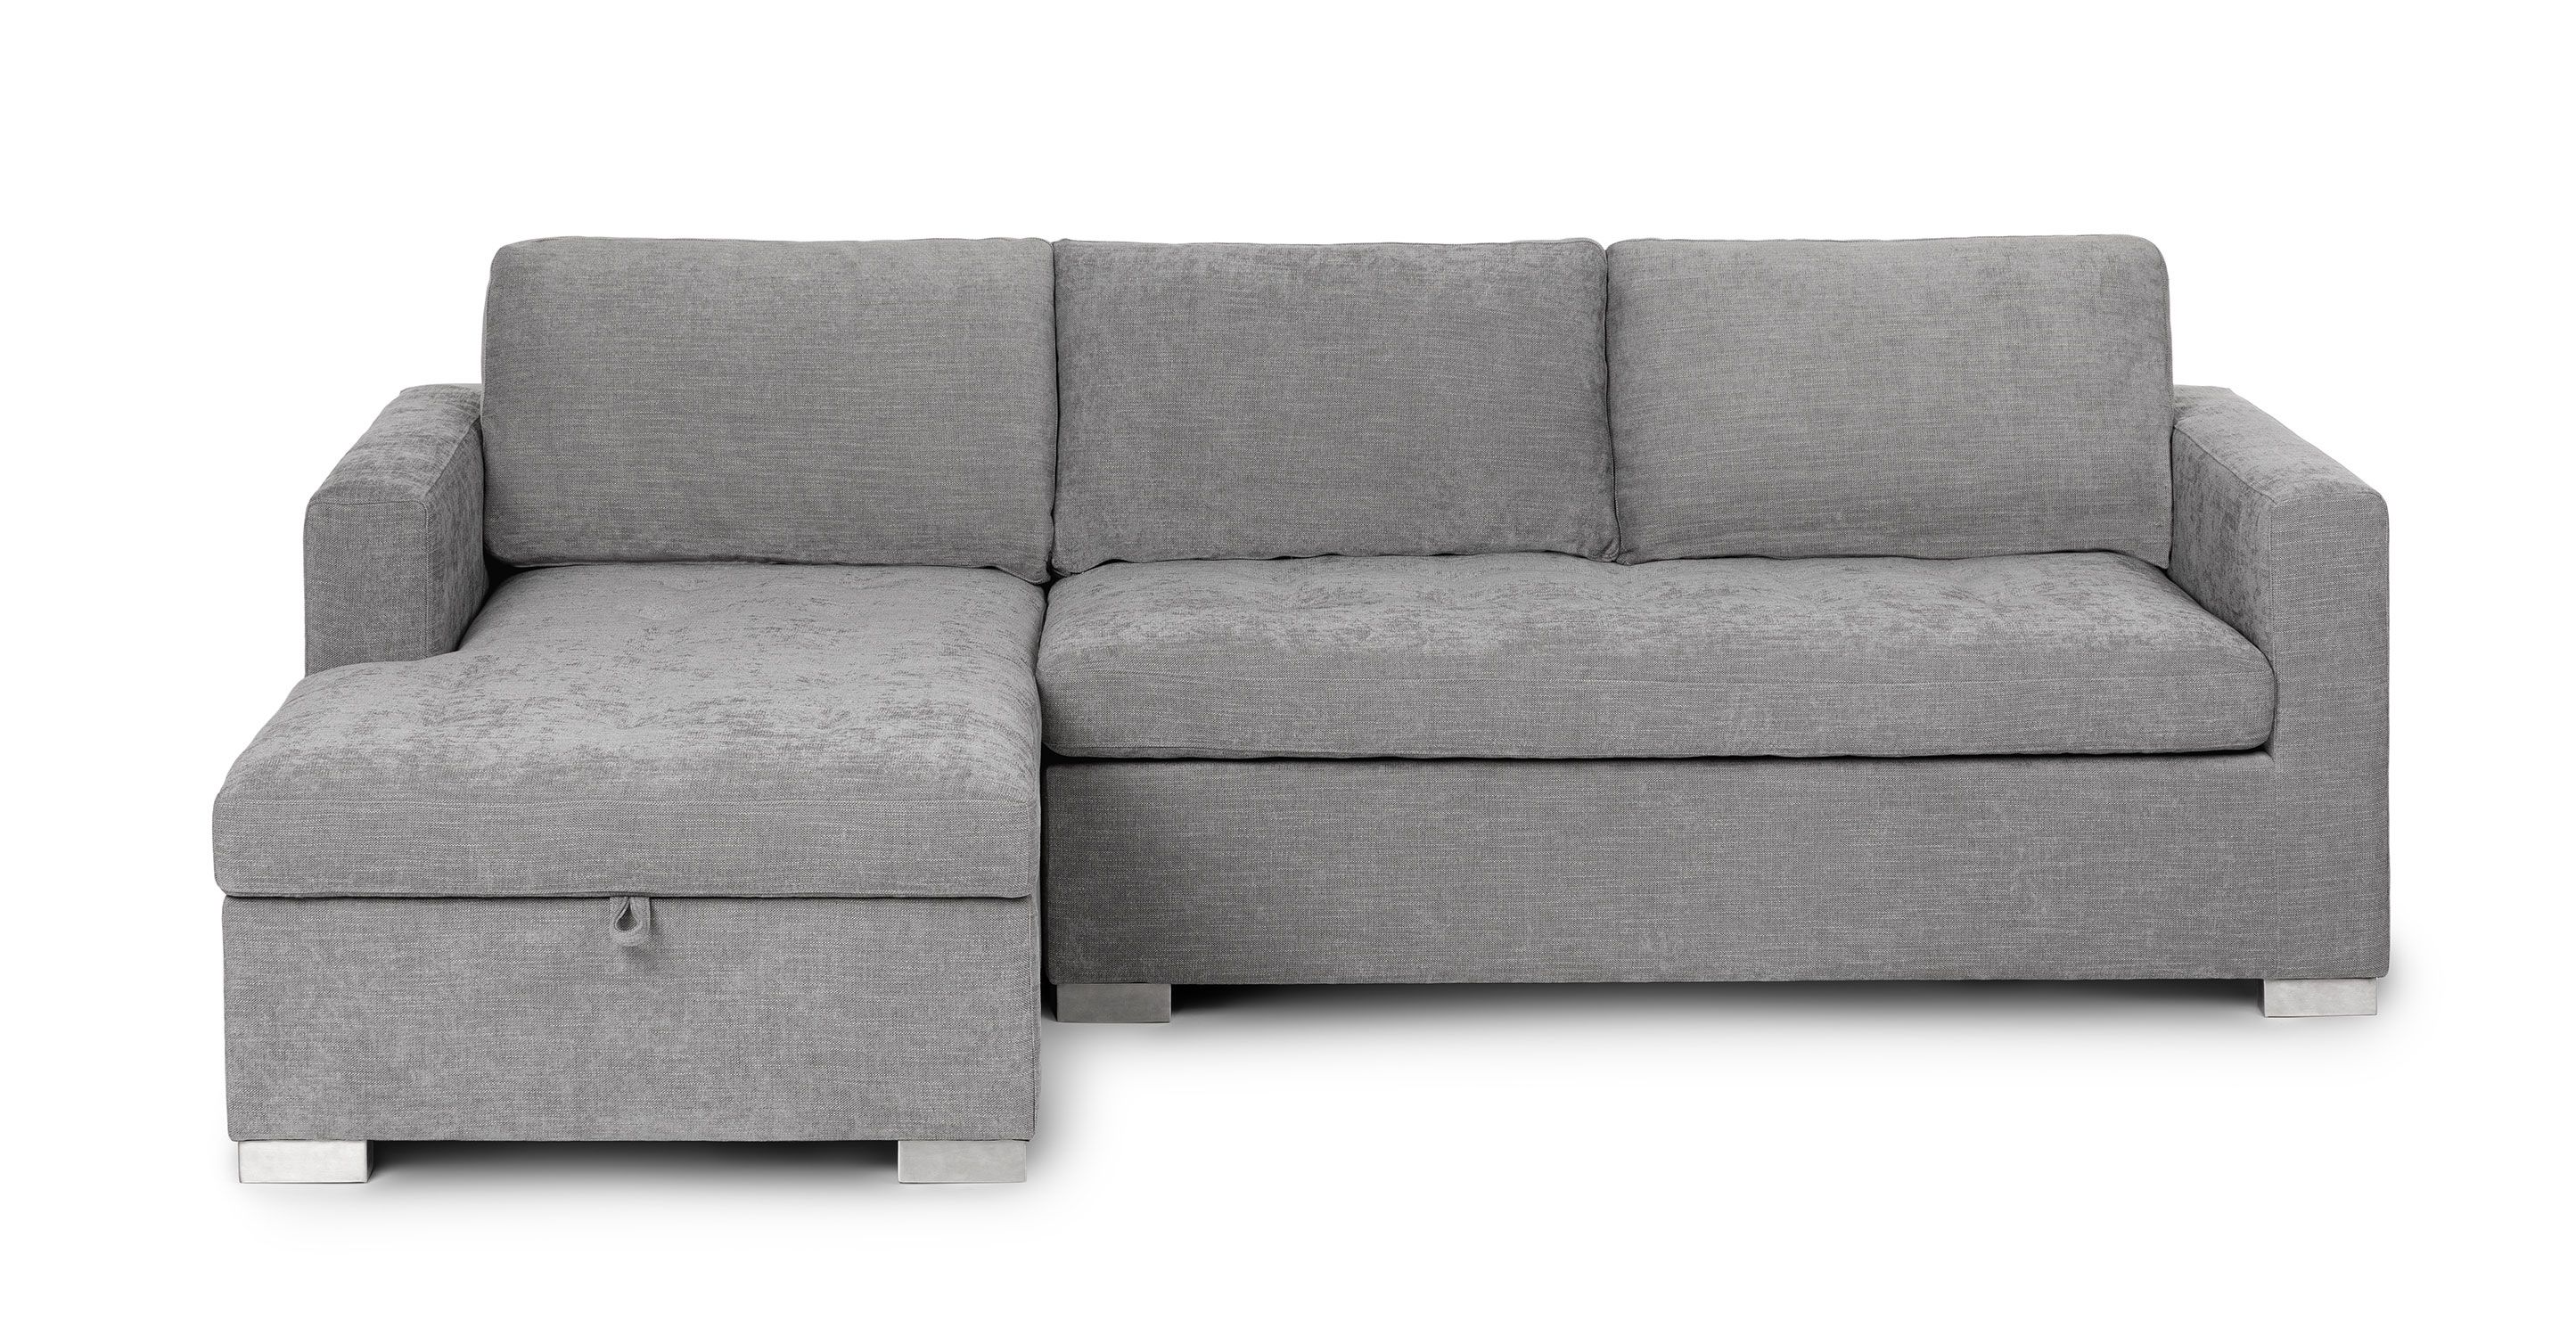 Right Facing Dawn Gray Fabric Sectional Sofa Bed | Soma | Article Regarding Sofa Beds With Right Chaise And Pillows (Gallery 6 of 20)